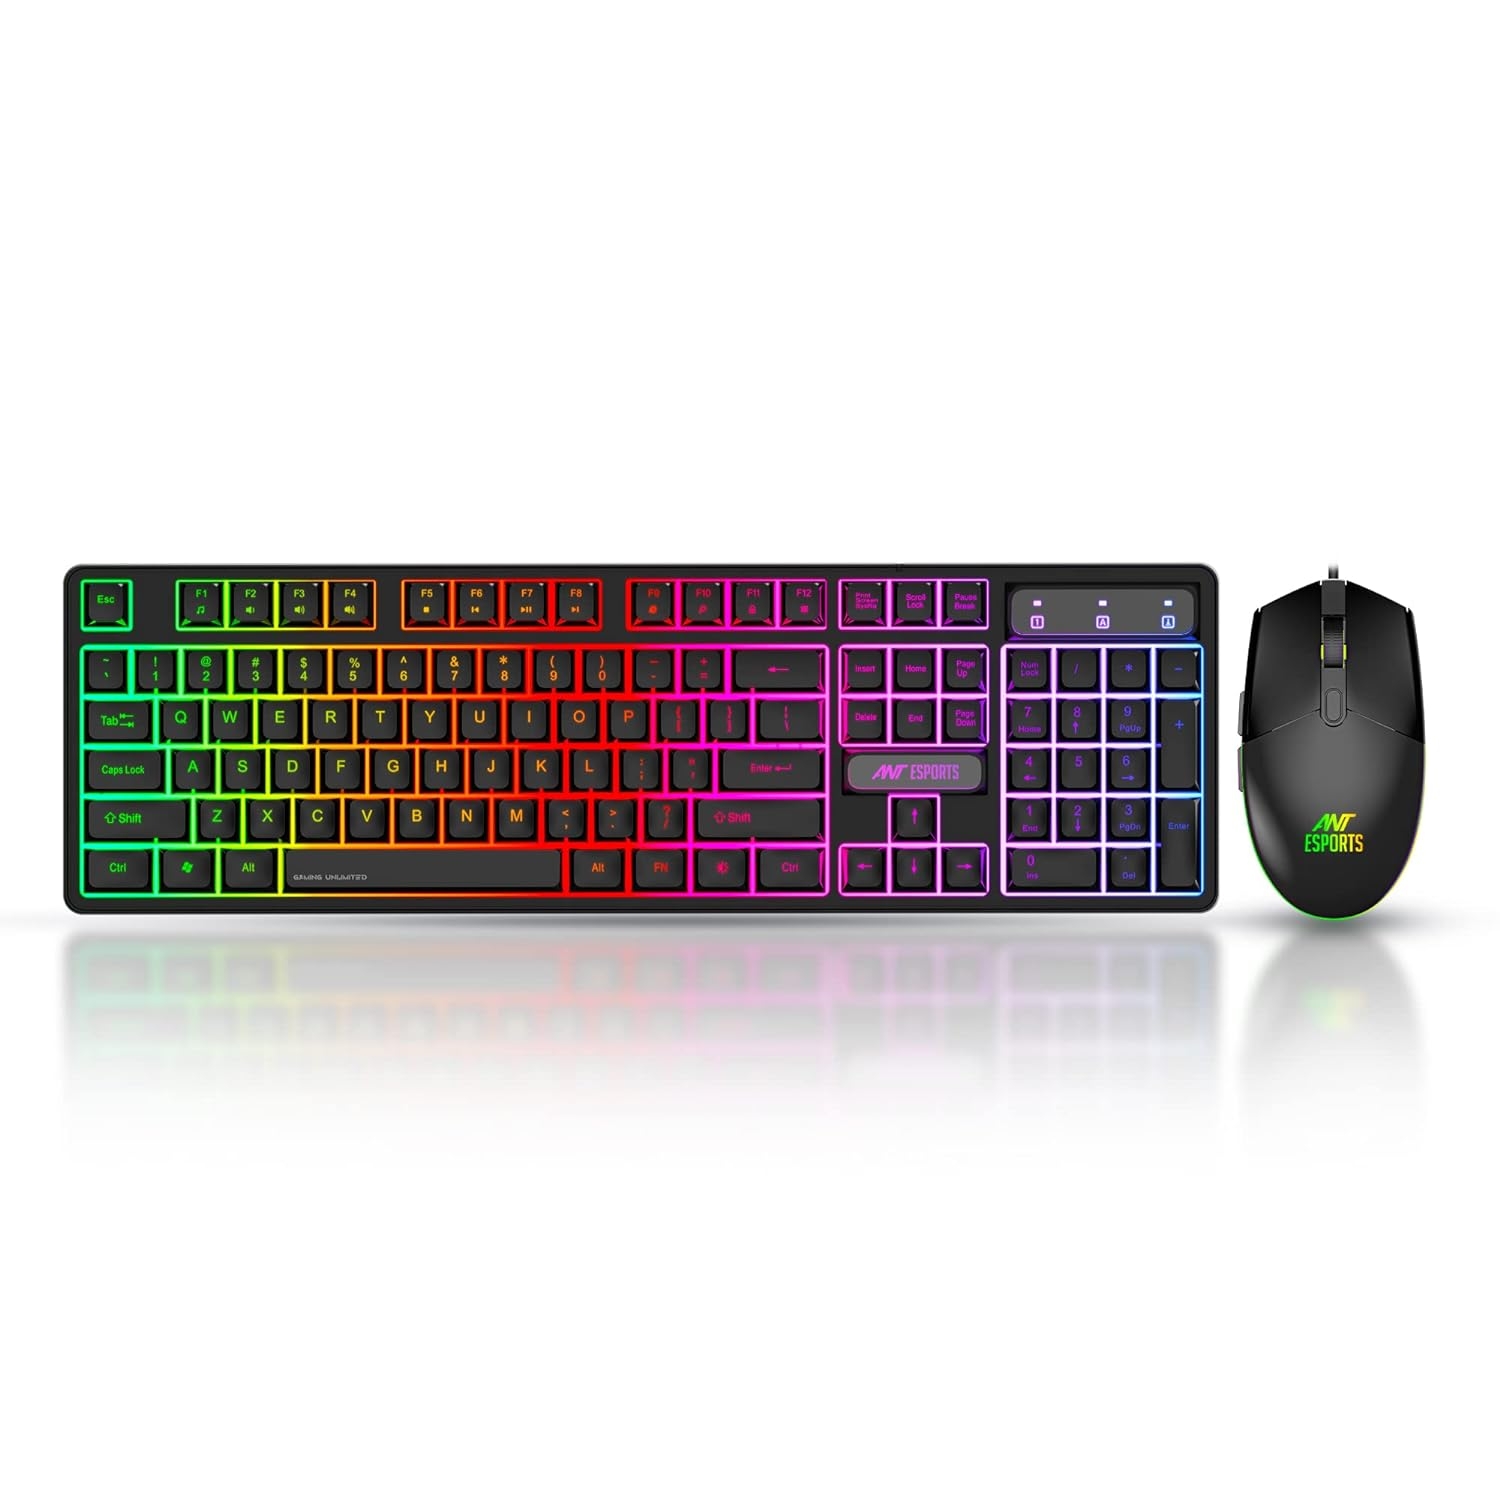 Ant Esports KM1600 Gaming Keyboard & Mouse Combo, Wired Backlit Rainbow LED Keyboard & 3200 DPI Gaming Mouse for PC/Laptop - Black